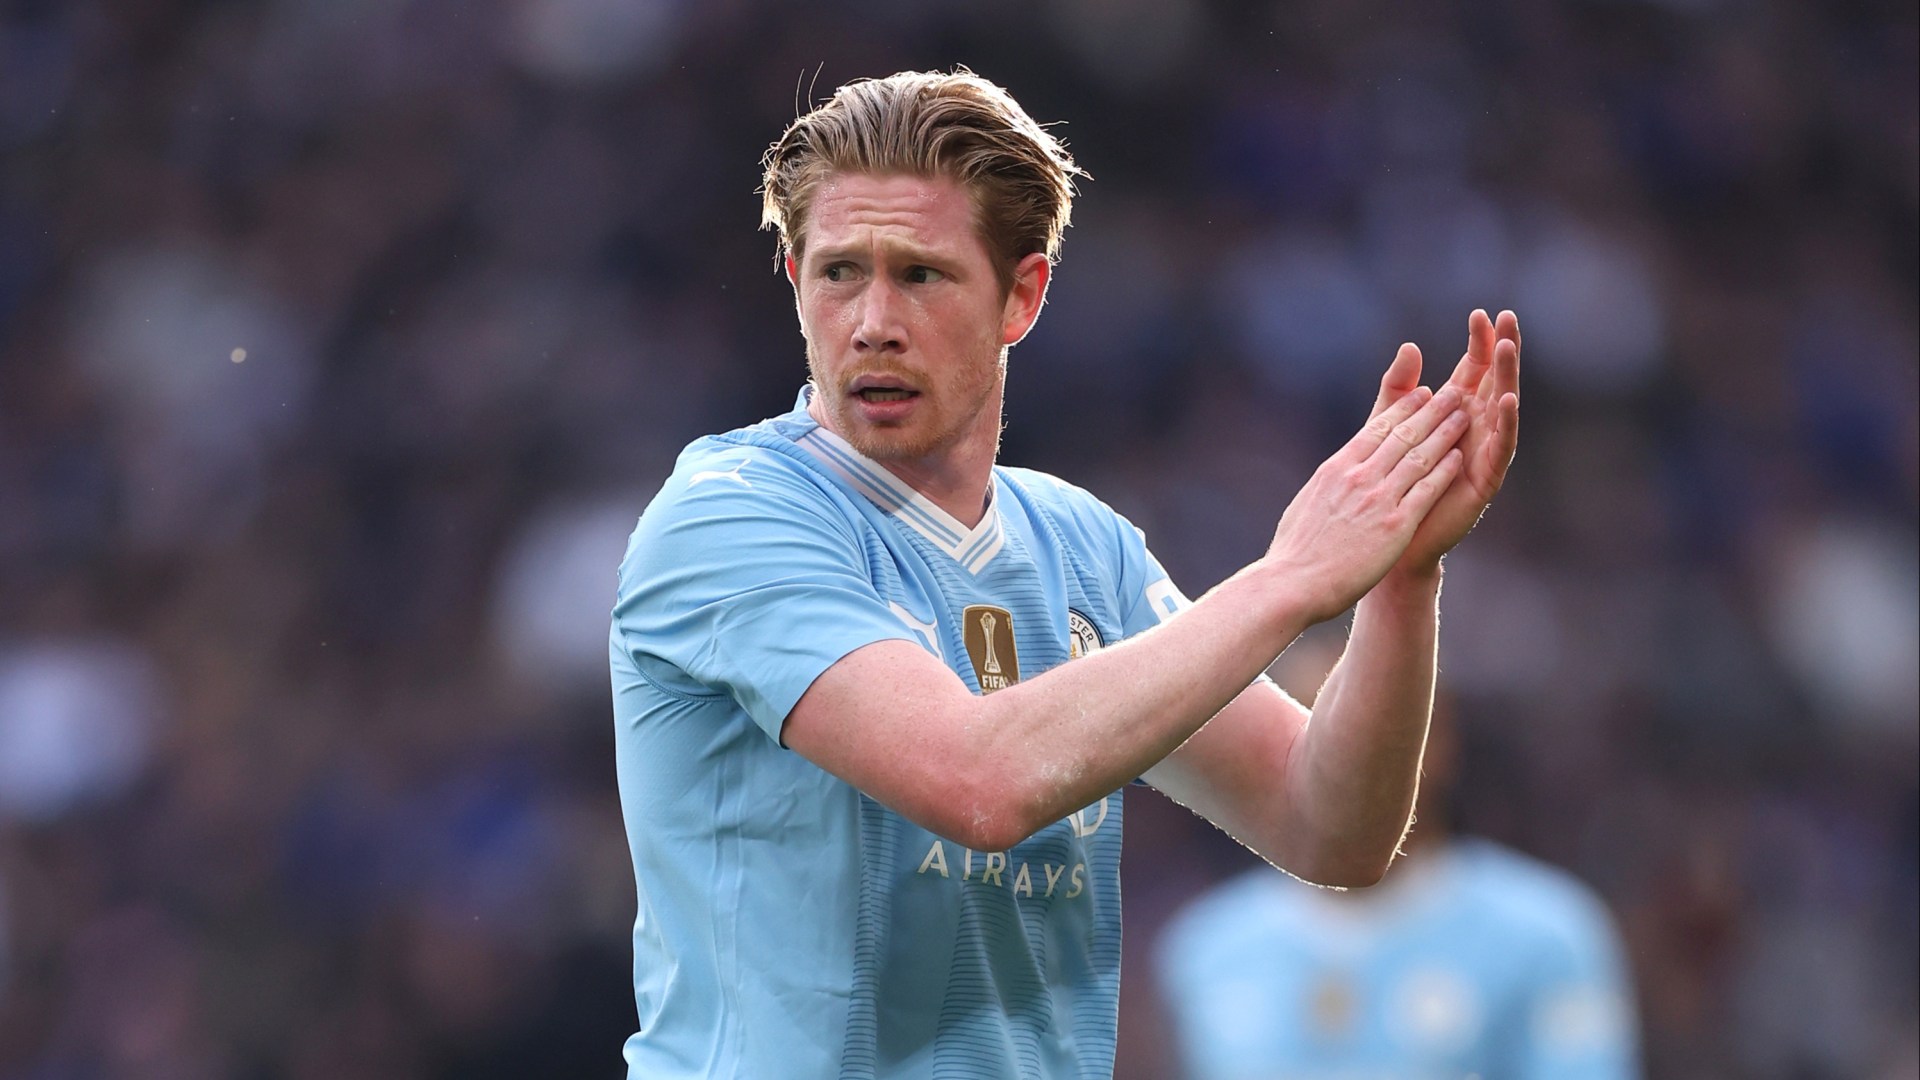 Kevin De Bruyne tipped for stunning MLS transfer by former Belgium team-mate as Man City ace’s contract runs down [Video]